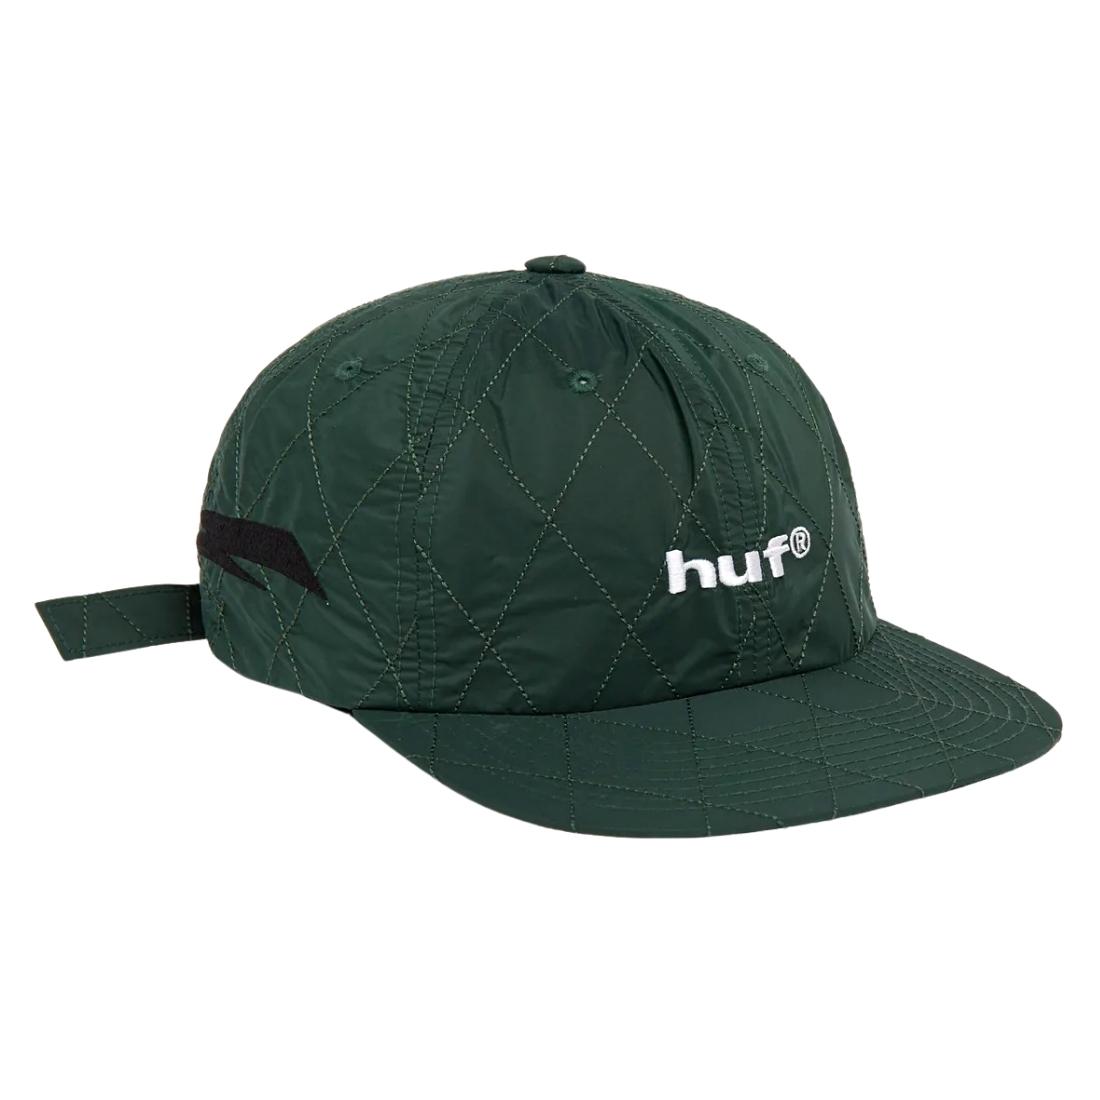 Huf Lightning Quilted 6 Panel Cap - Forest Green - Strapback Cap by Huf One Size